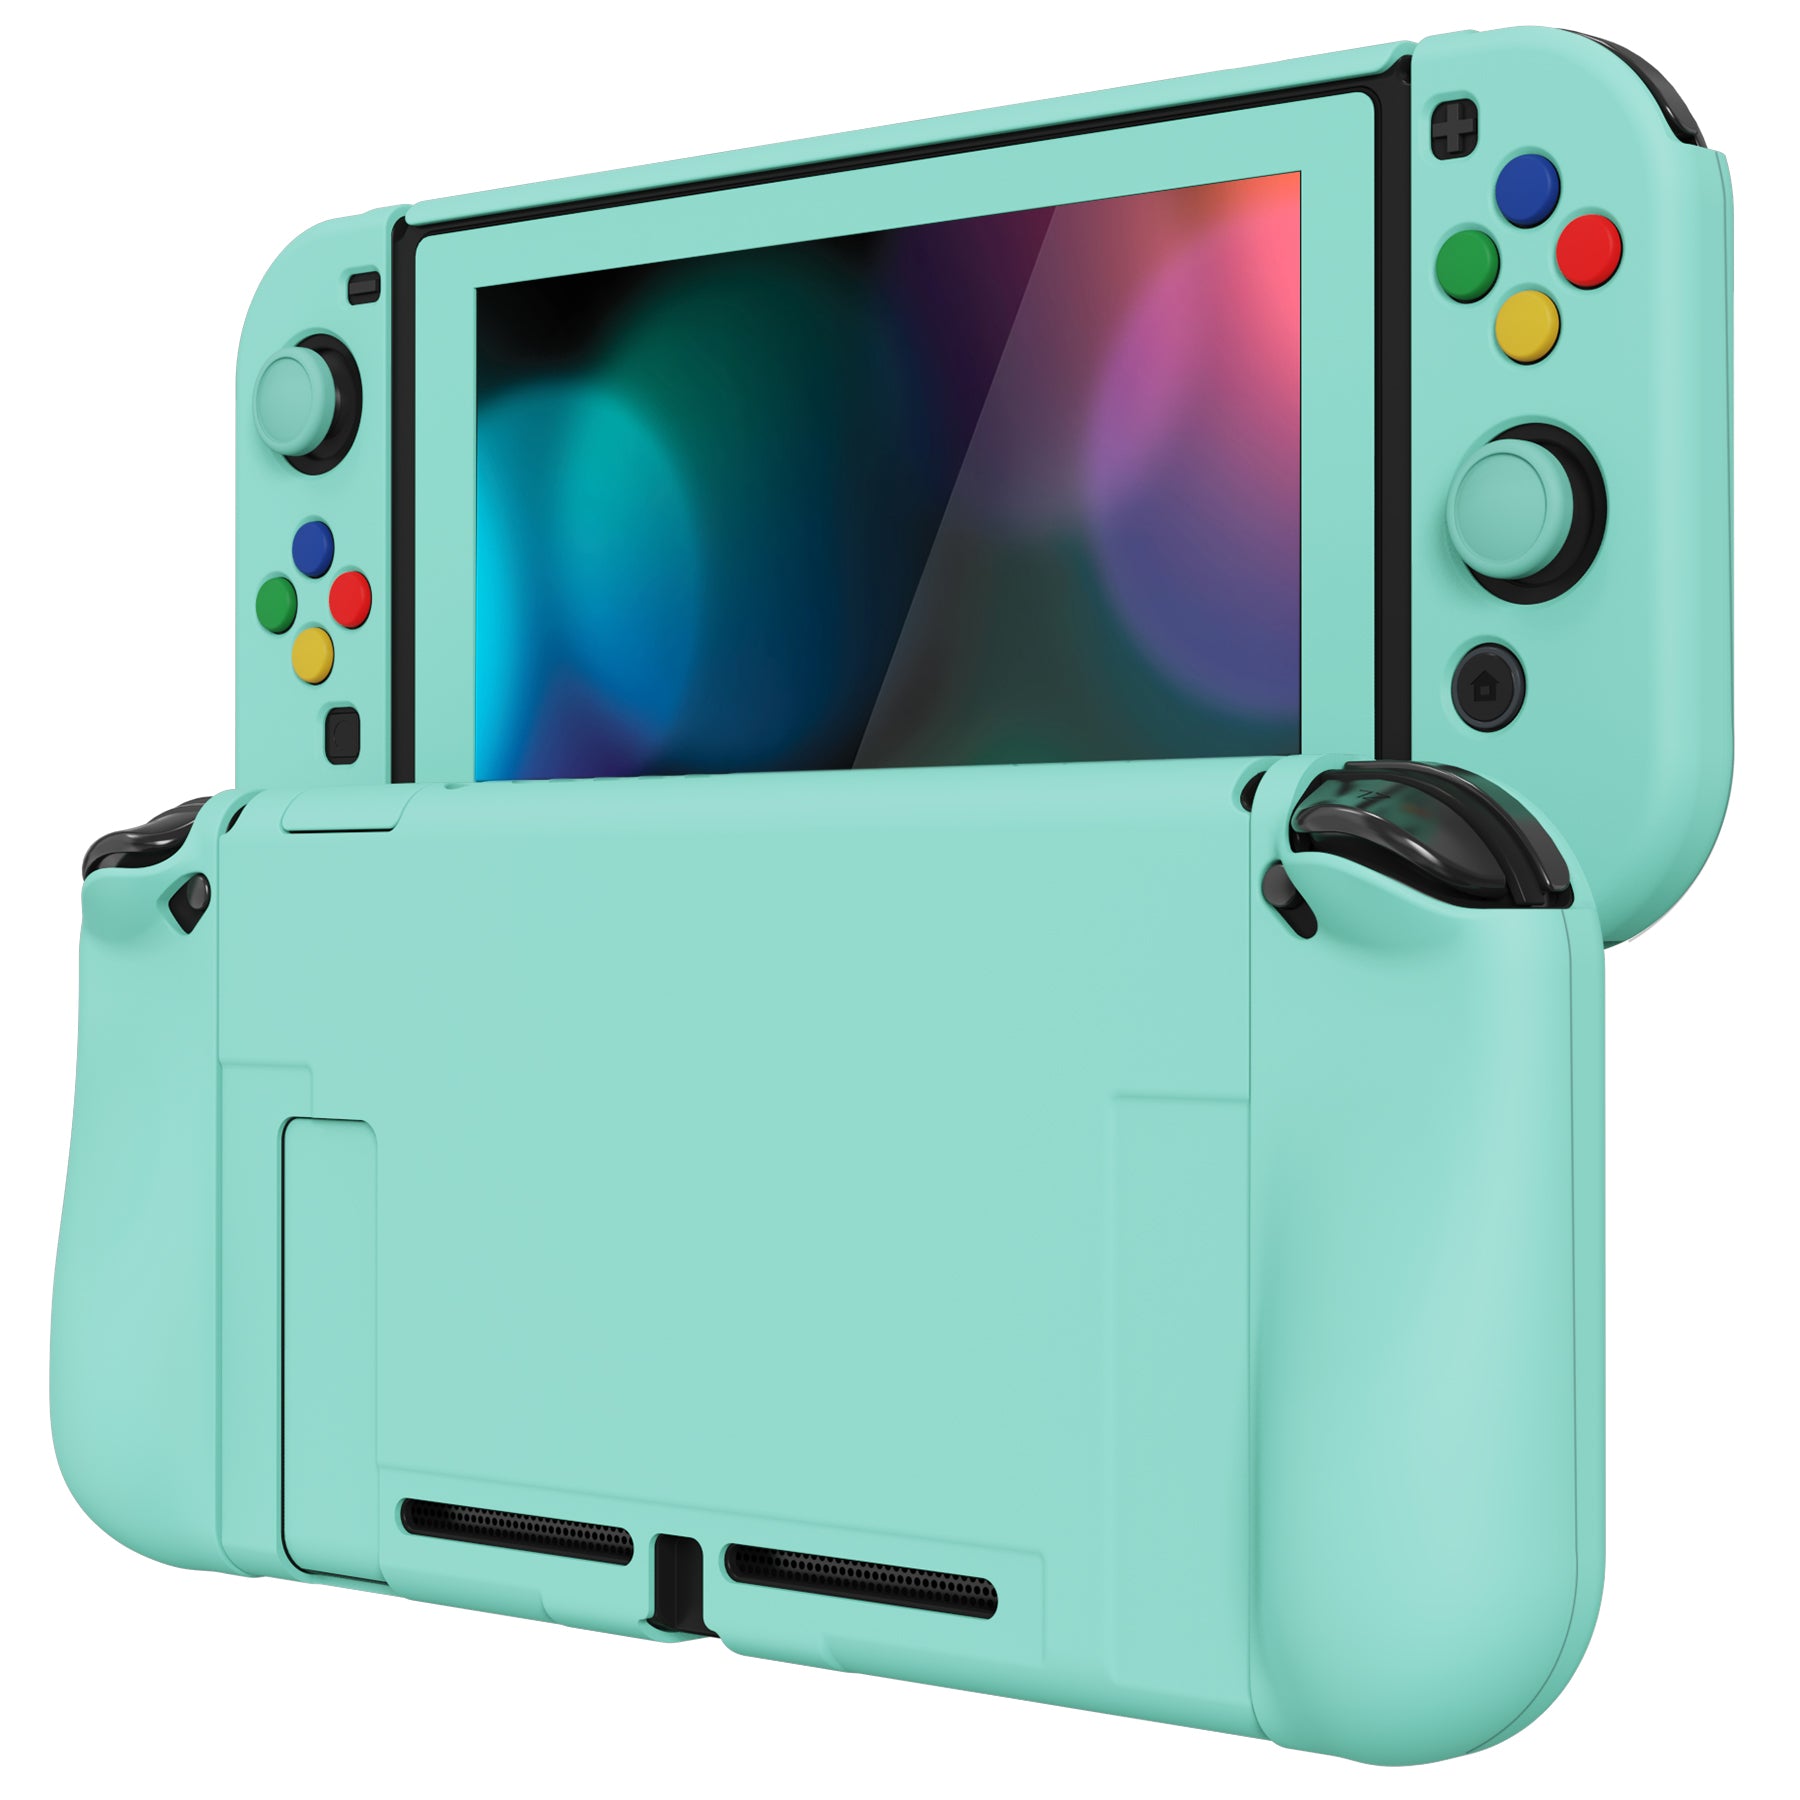 PlayVital AlterGrips Dockable Protective Case Ergonomic Grip Cover for Nintendo Switch, Interchangeable Joycon Cover w/Screen Protector & Thumb Grip Caps & Button Caps - Misty Green - TNSYP3009 playvital